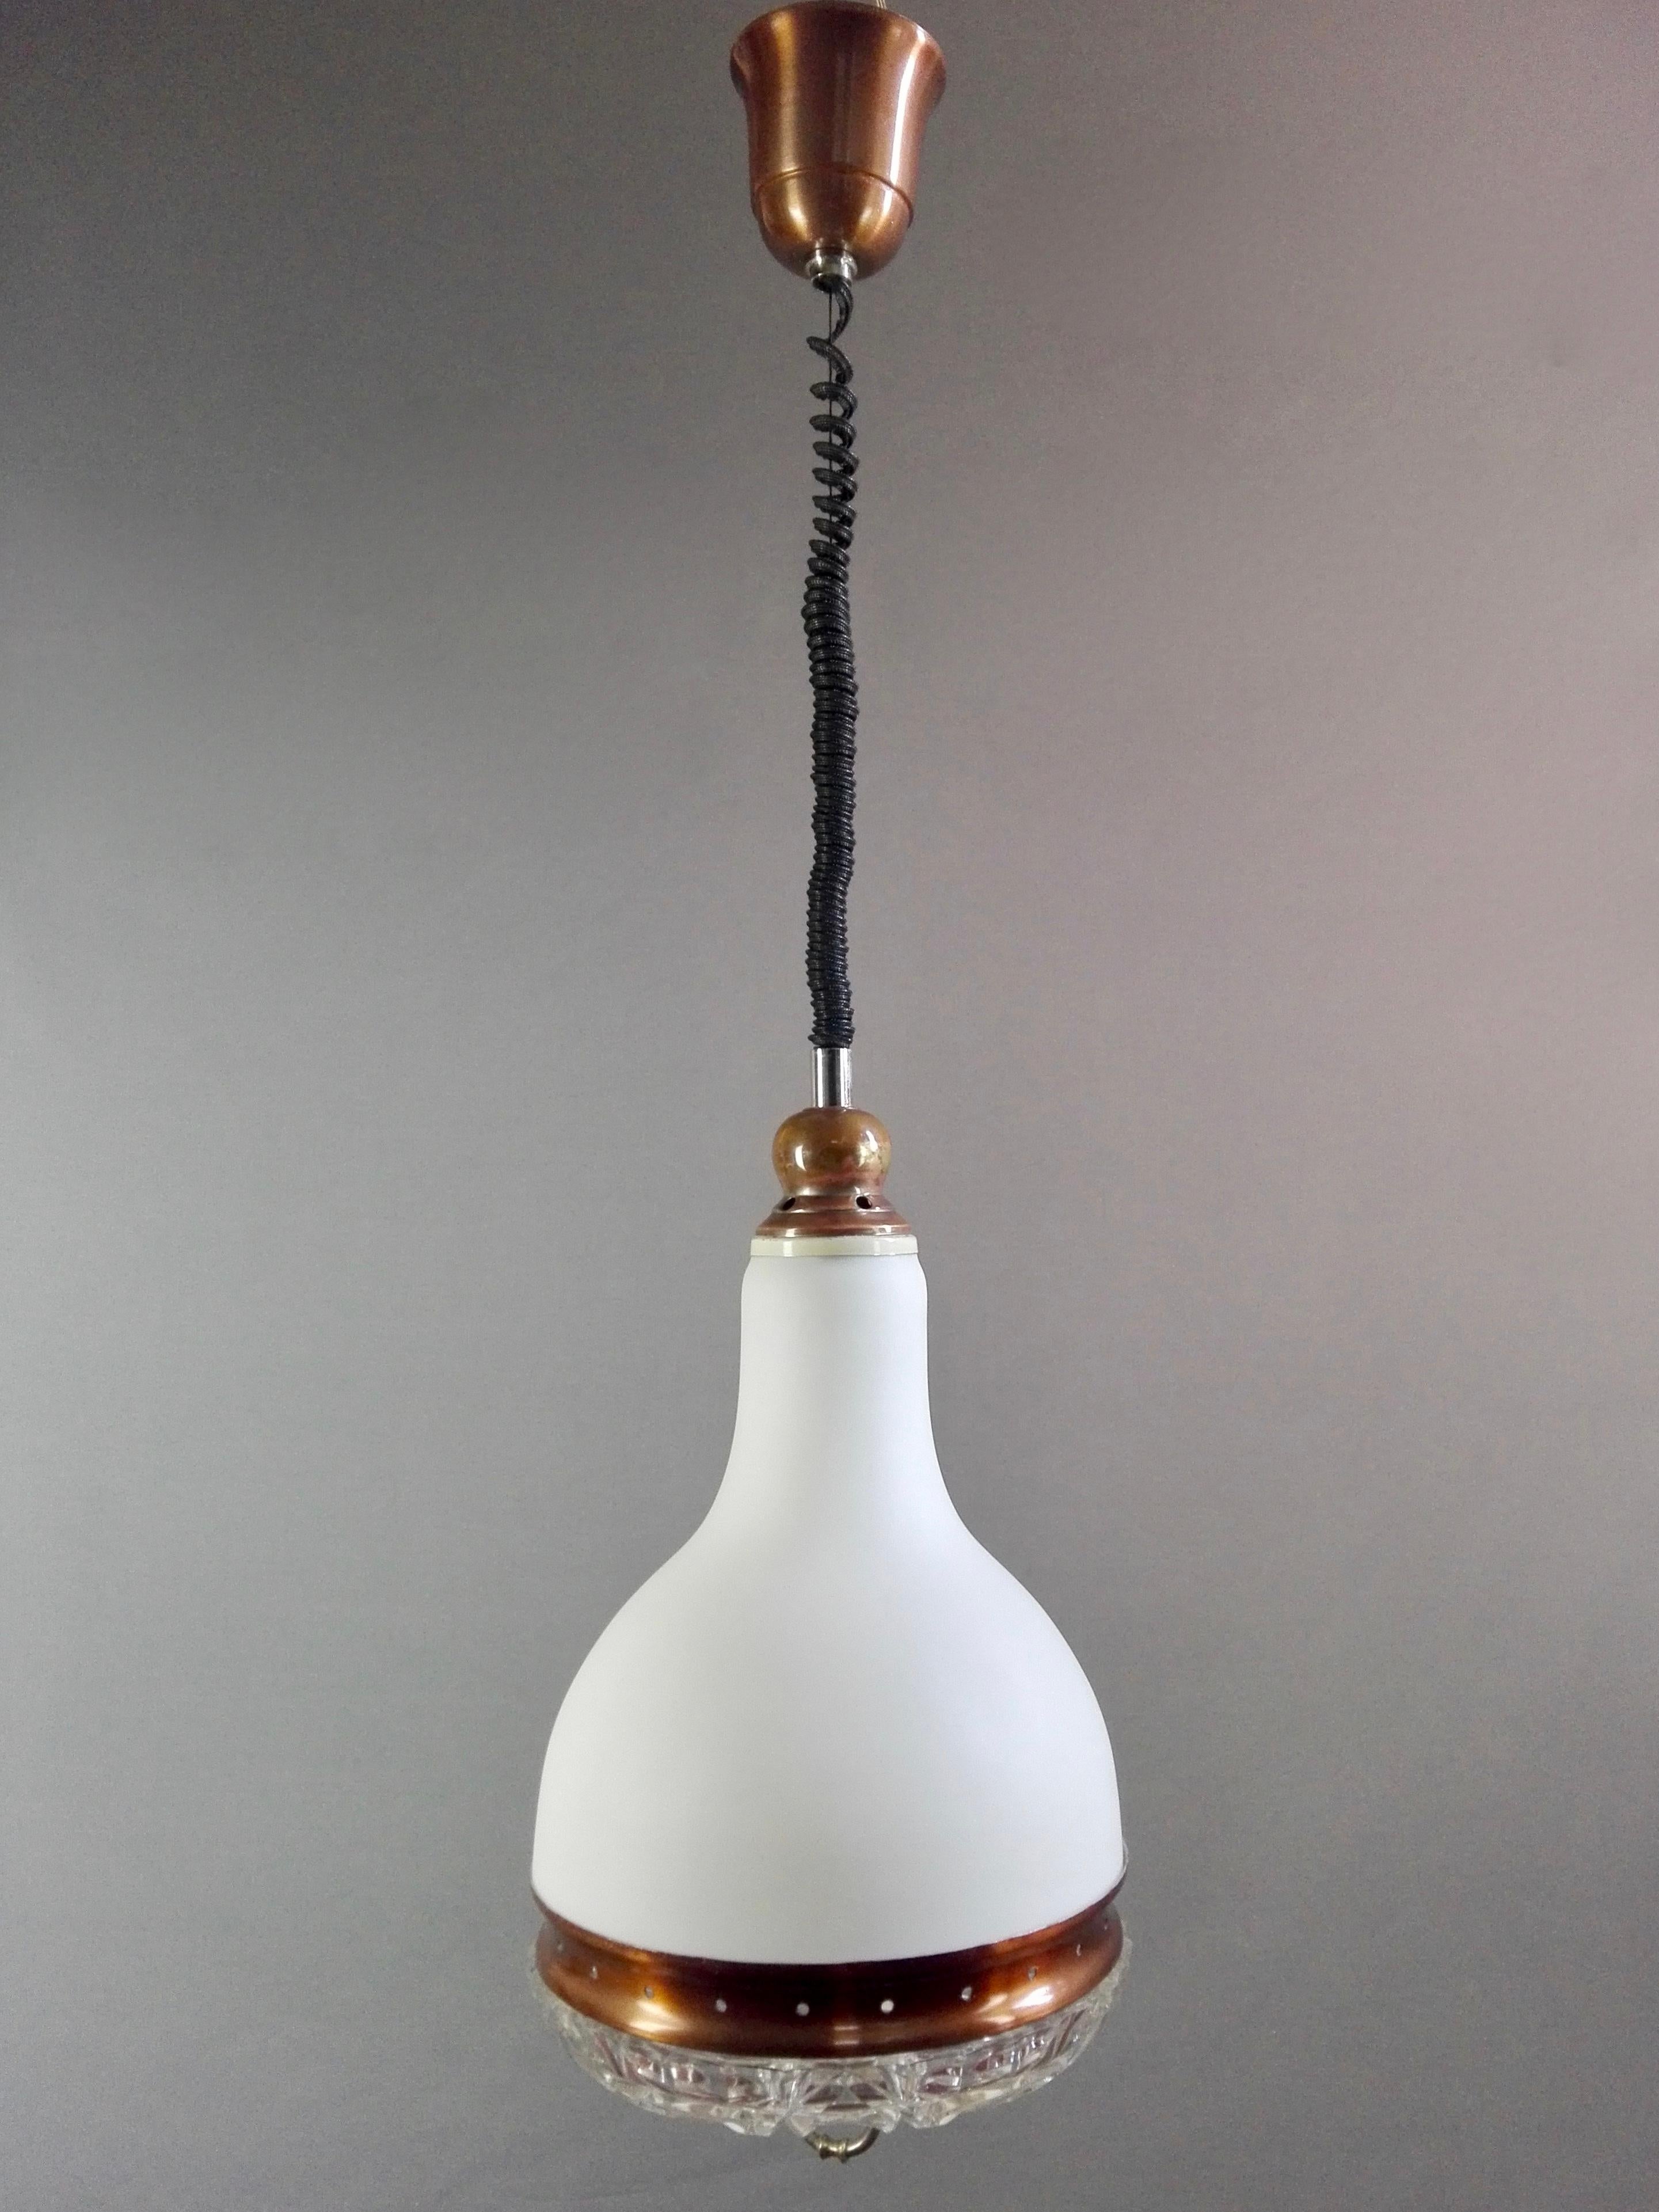 Three-light rise-and-fall Murano glass pendant lamp from the 1960s, Italy. The upper part of the light is in cased white opaline glass. At its base is closed by a solid glass plate that has an elaborate and fascinating workmanship, with regular